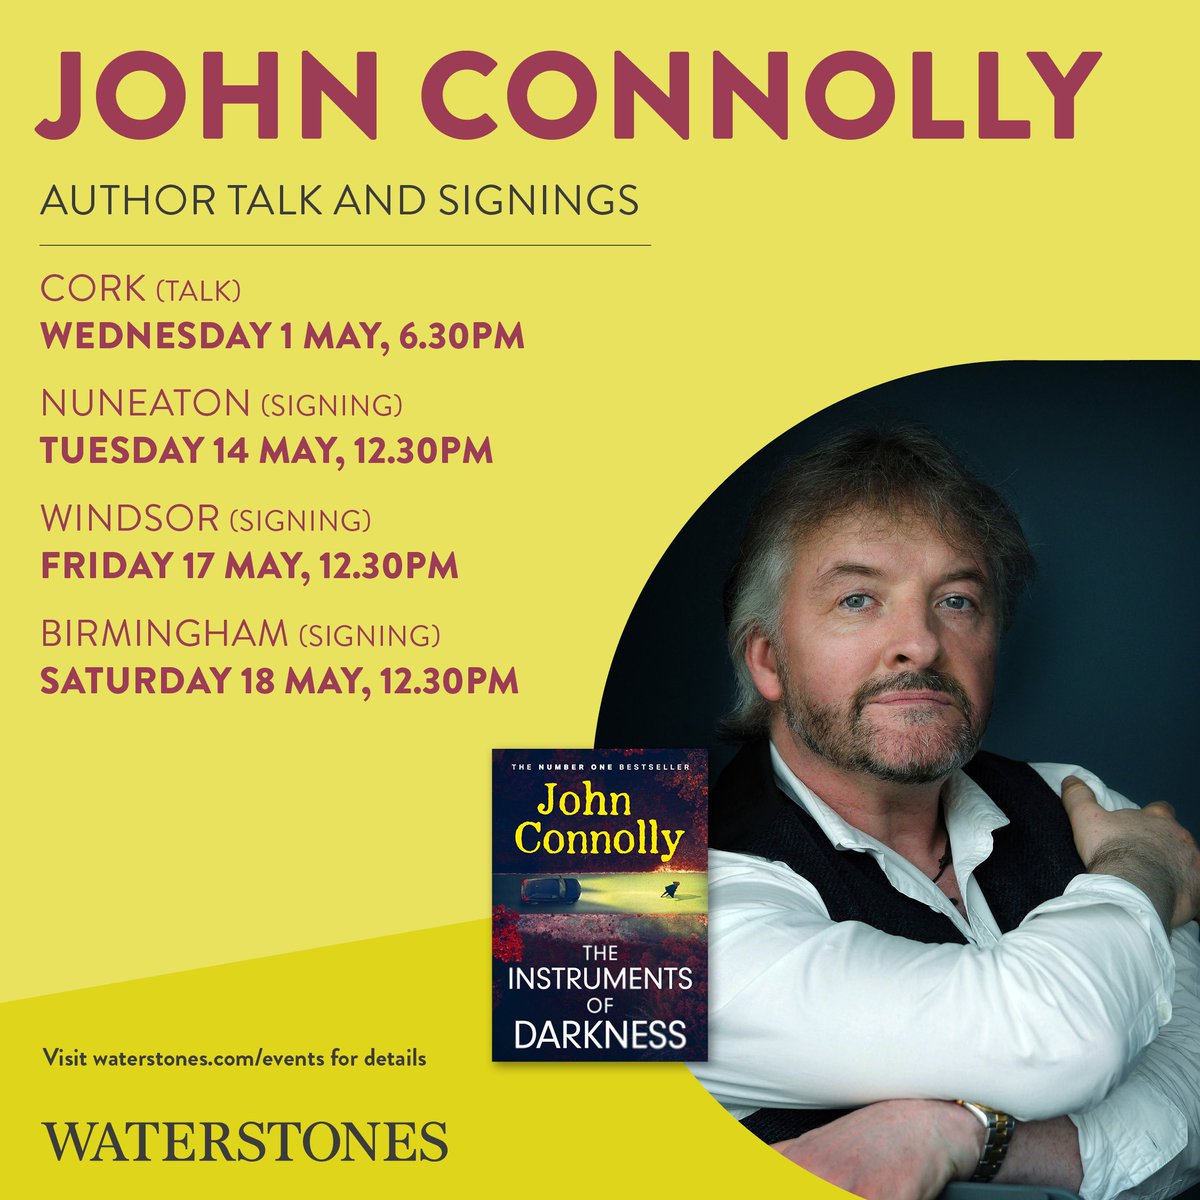 We're looking forward to welcoming @jconnollybooks back to Cork for a chat about books and who knows what else on May 1st. It's always a good night when John visits. @corkcitylibrary @echolivecork @irishexaminer @HachetteIre #CharlieParker ##TheInstrumentsofDarkness #Cork